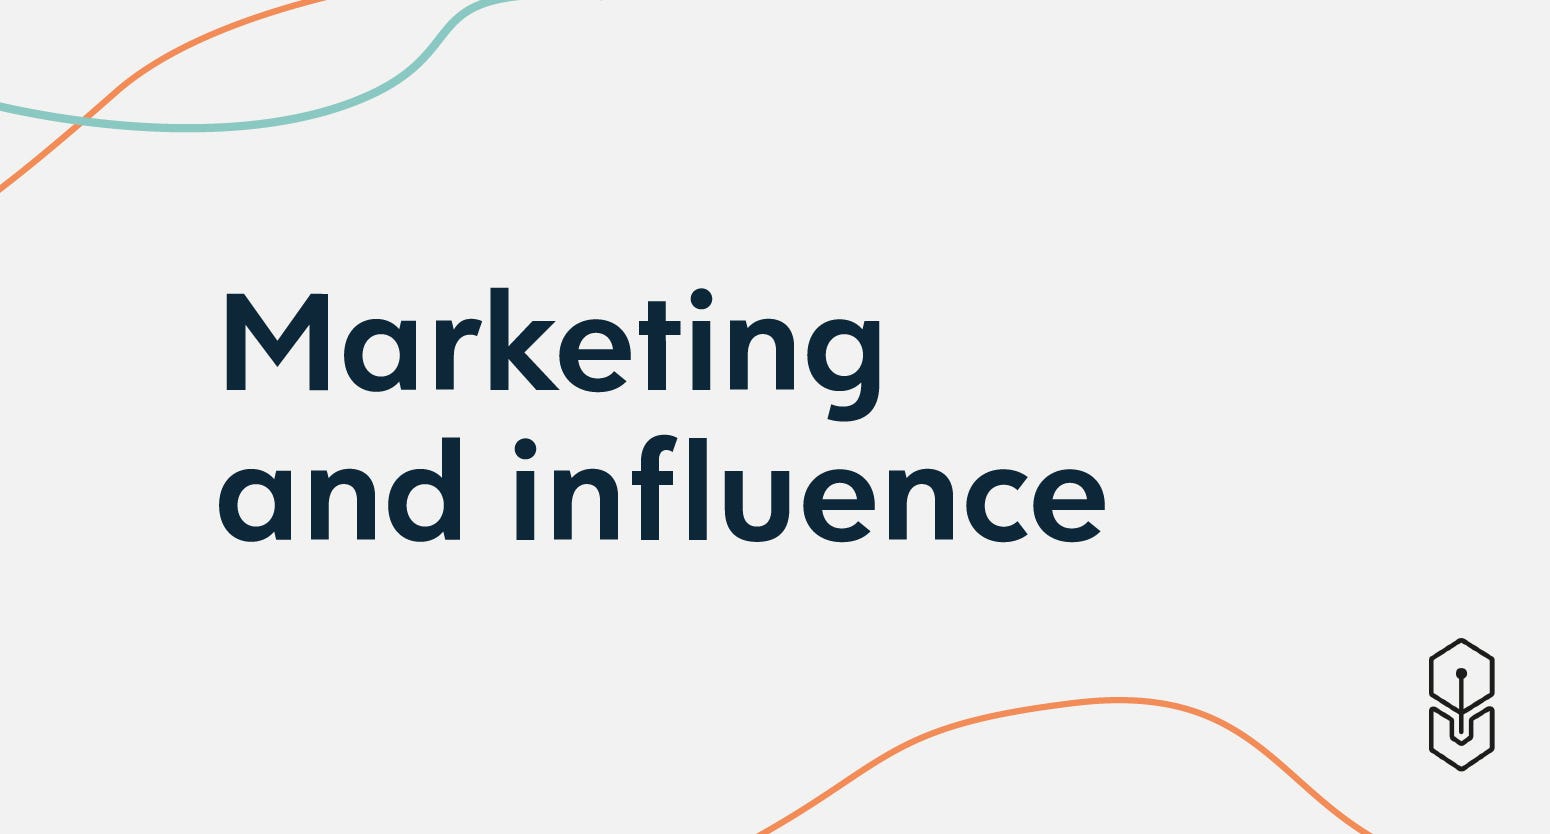 Marketing and influence